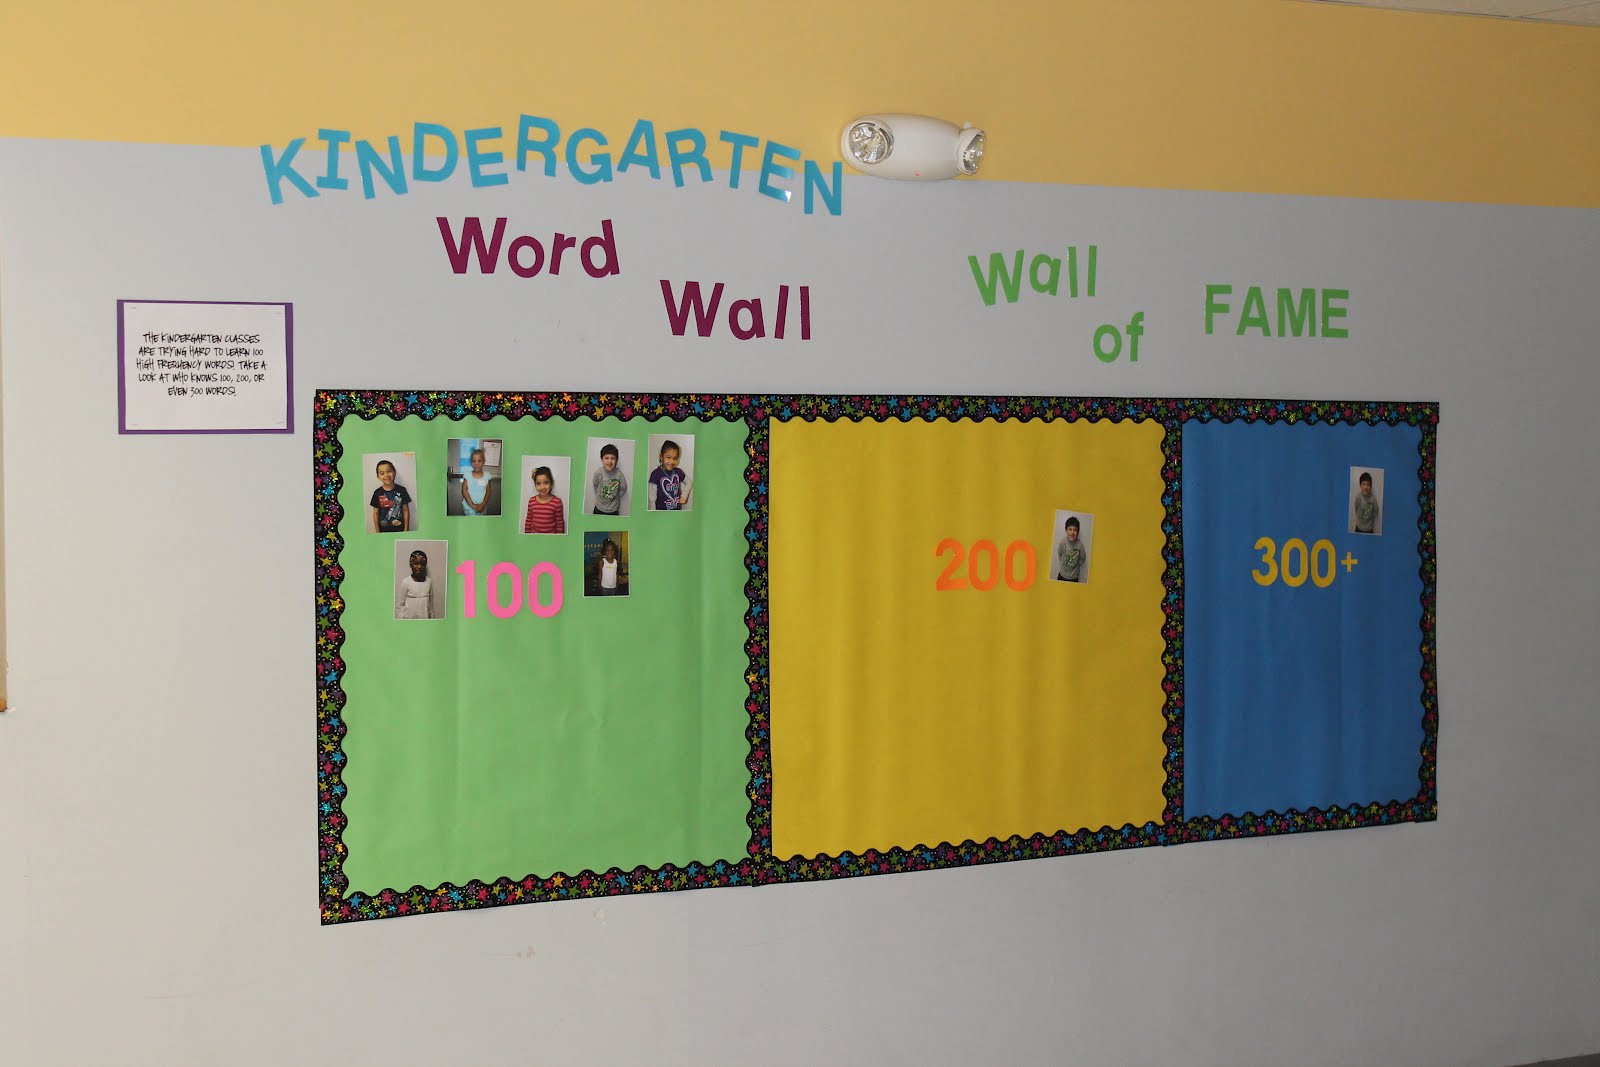 Wordwall beginner. Word Wall. Wall of Fame. Wordwall 7. Wall of Fame in English class.